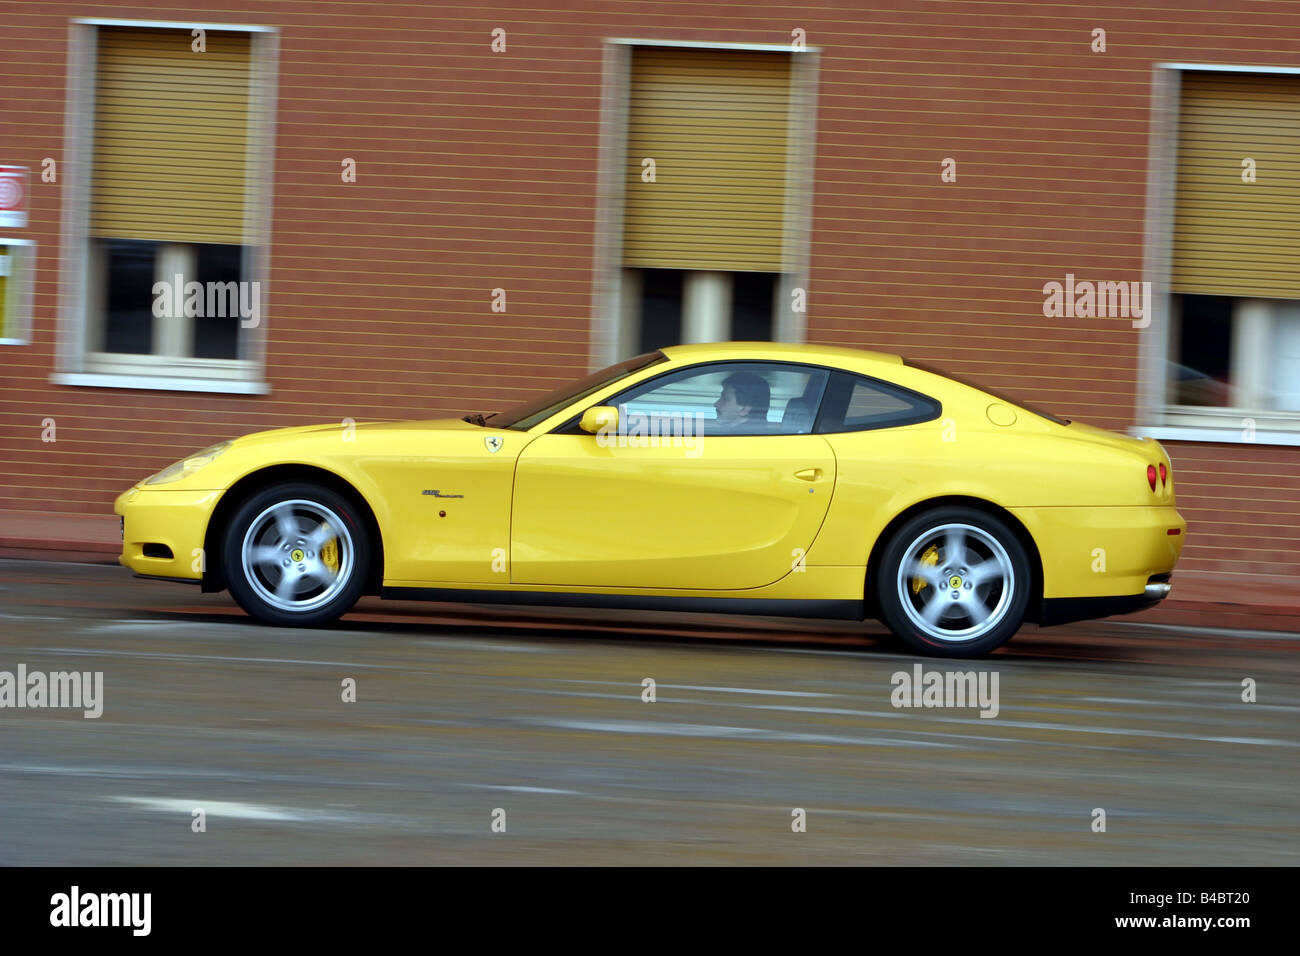 Car, Ferrari 612 Sapprox.lietti, roadster, model year 2004-, coupe/Coupe, yellow, driving, side view, City, photographer: Hans D Stock Photo